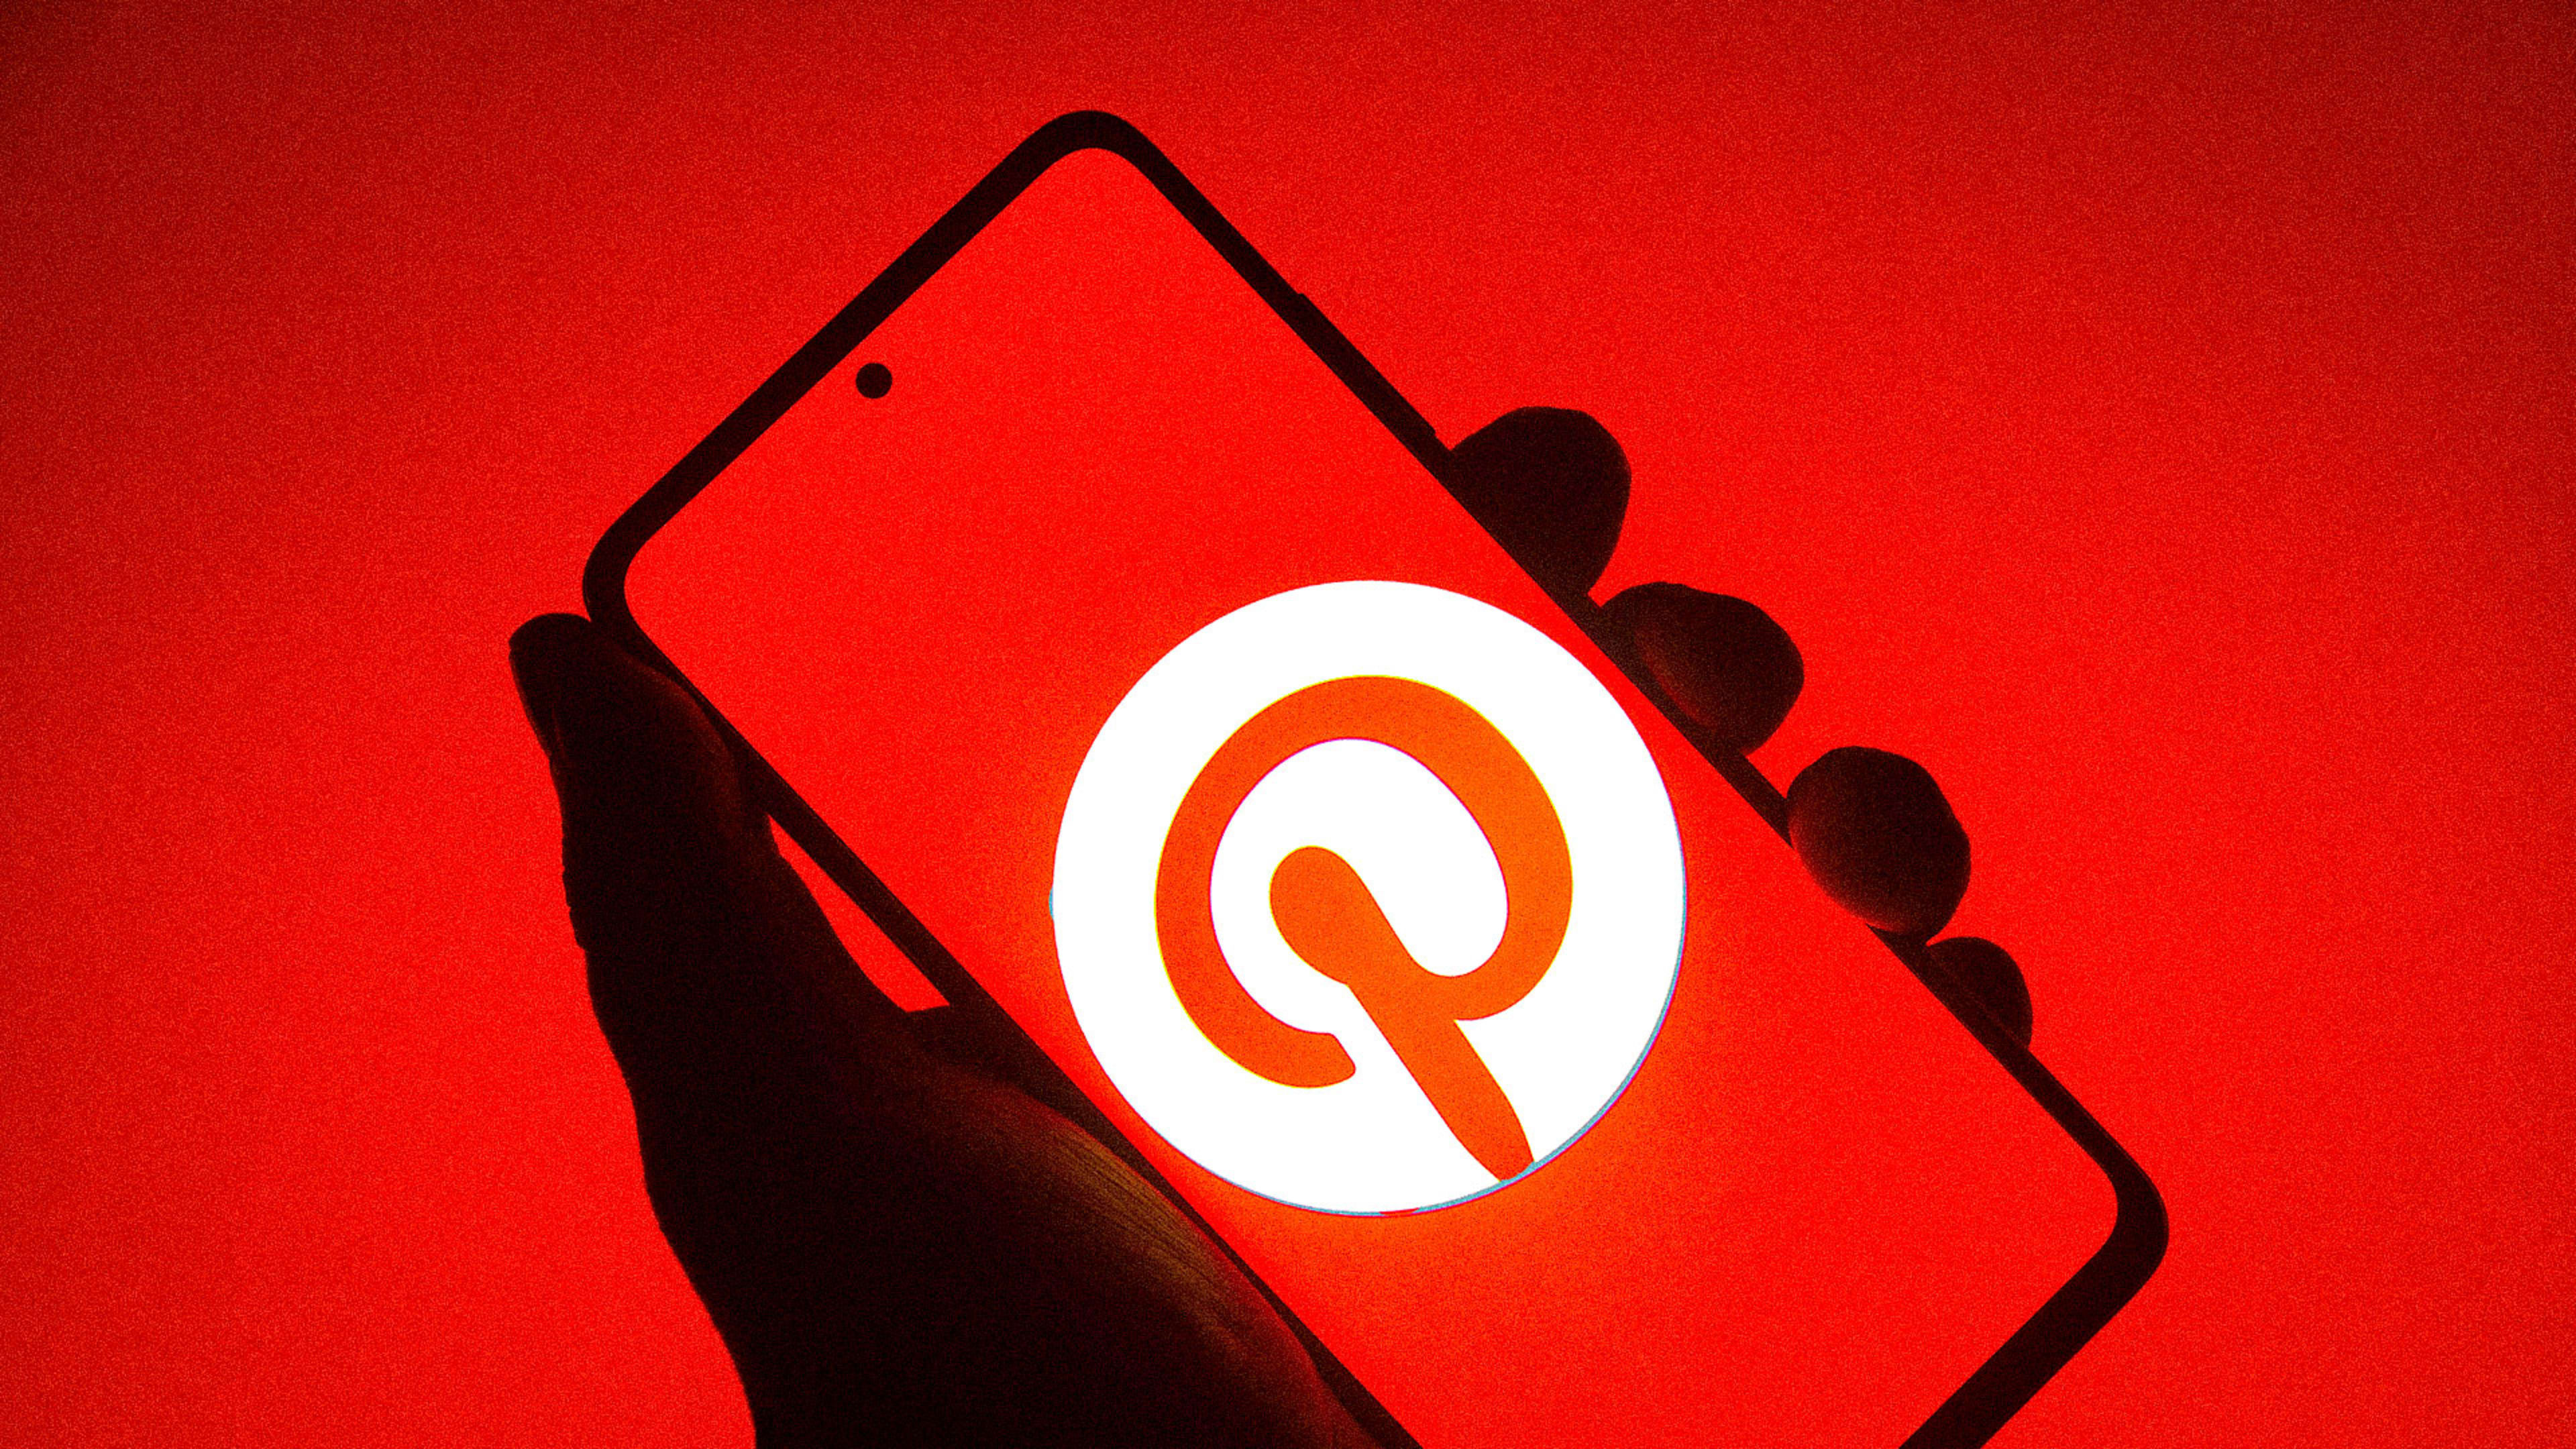 Pinterest stock: PINS soars after Elliott Management buys over 9% stake